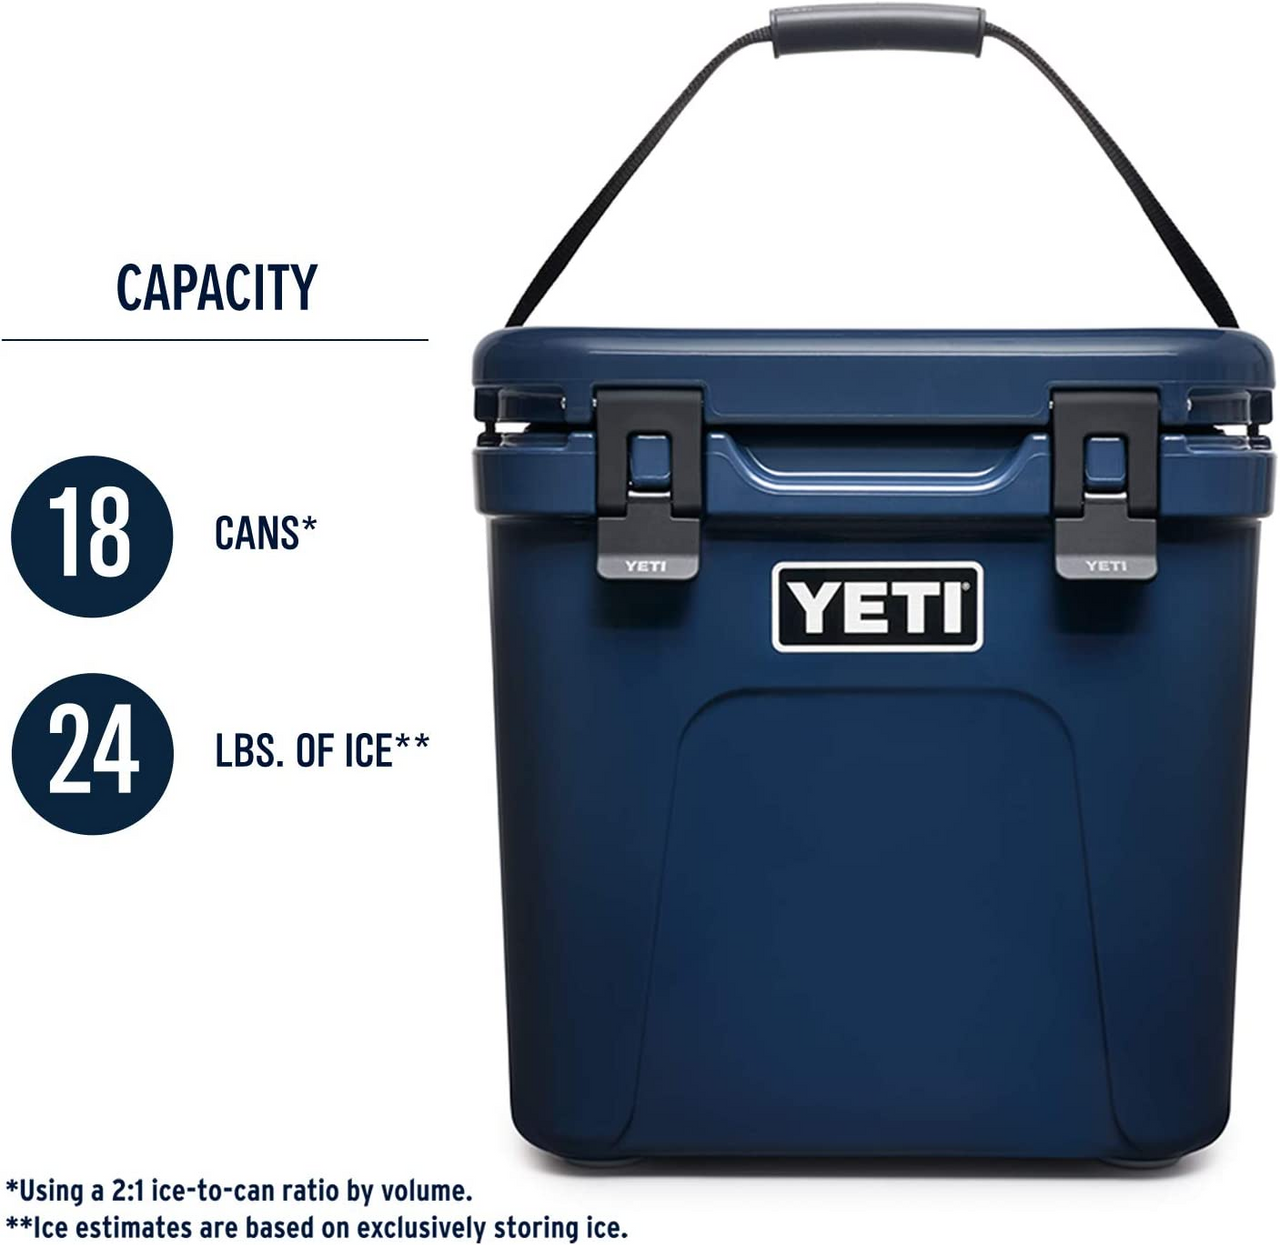 New Yeti Reef Blue coolers in stock! - Big K LP Gas, Inc.